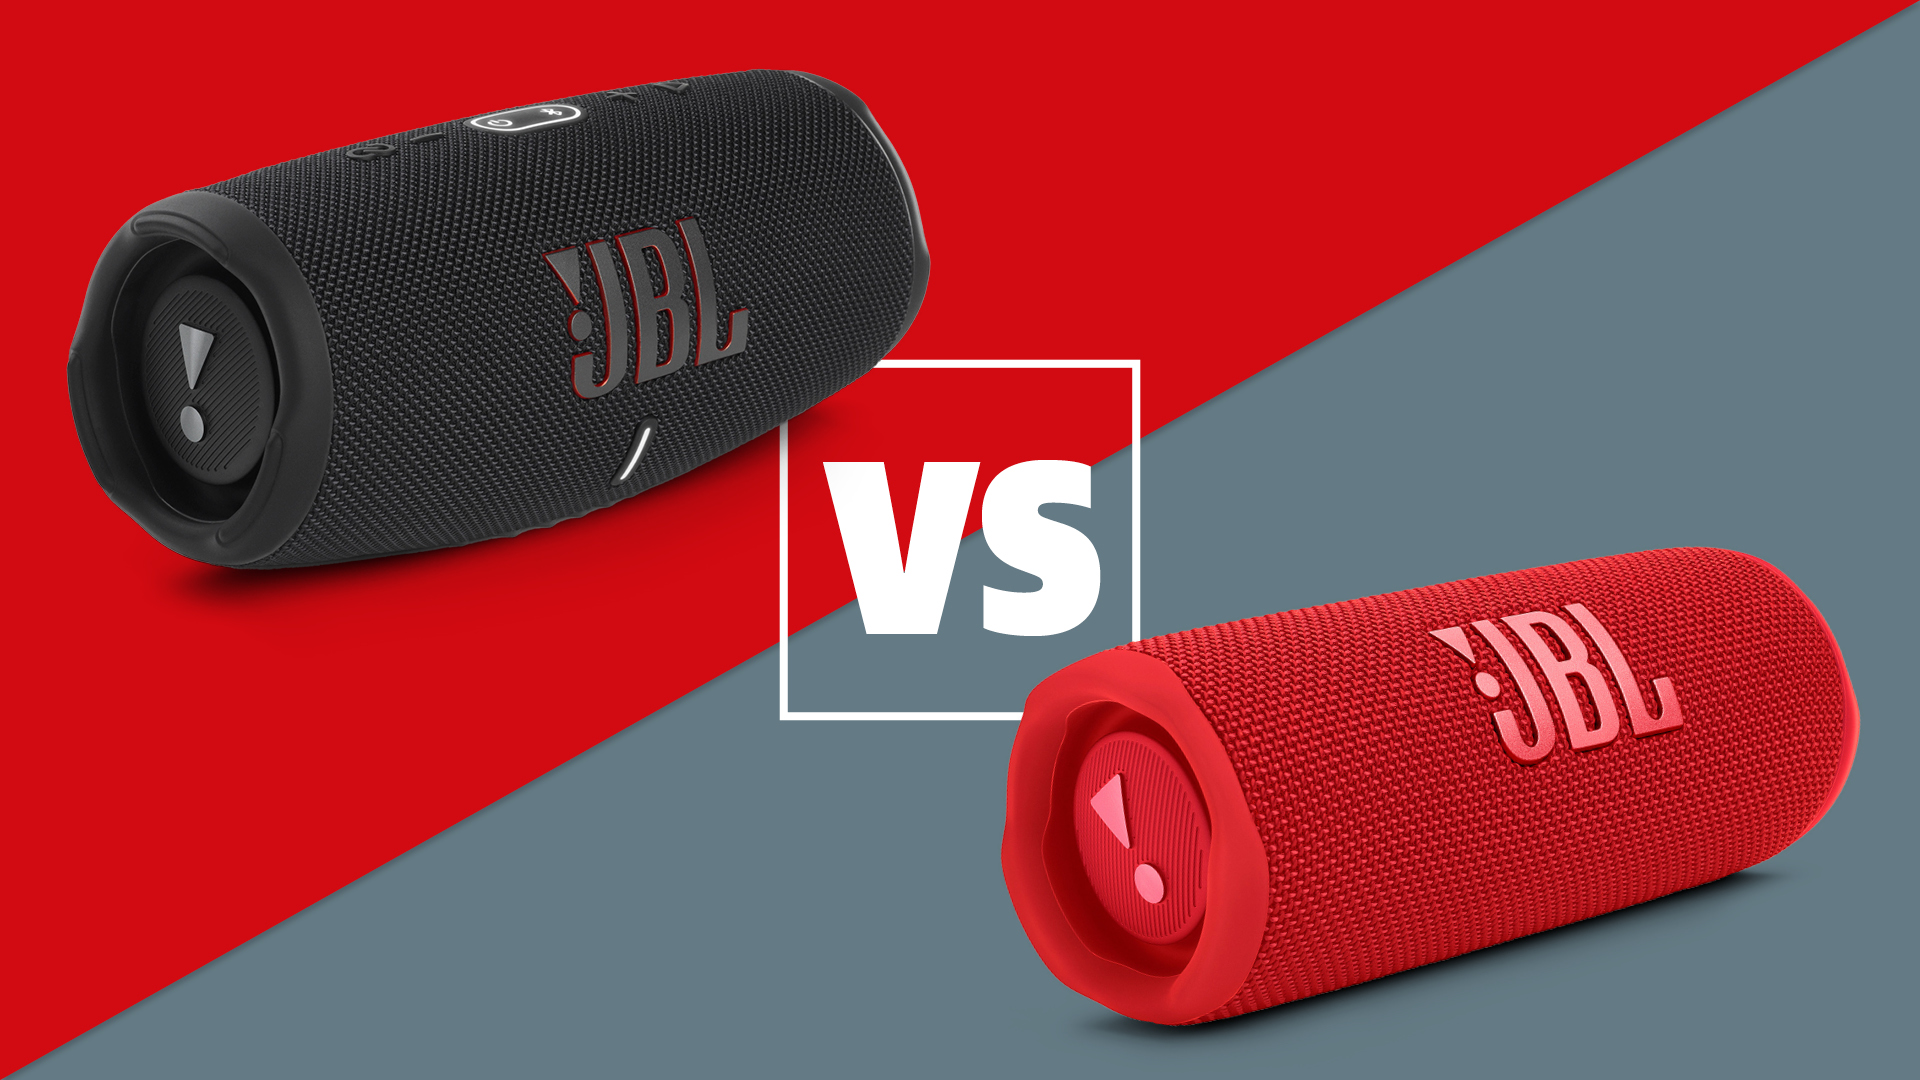 JBL Charge vs Flip 6: which Bluetooth speaker is better? What Hi-Fi?